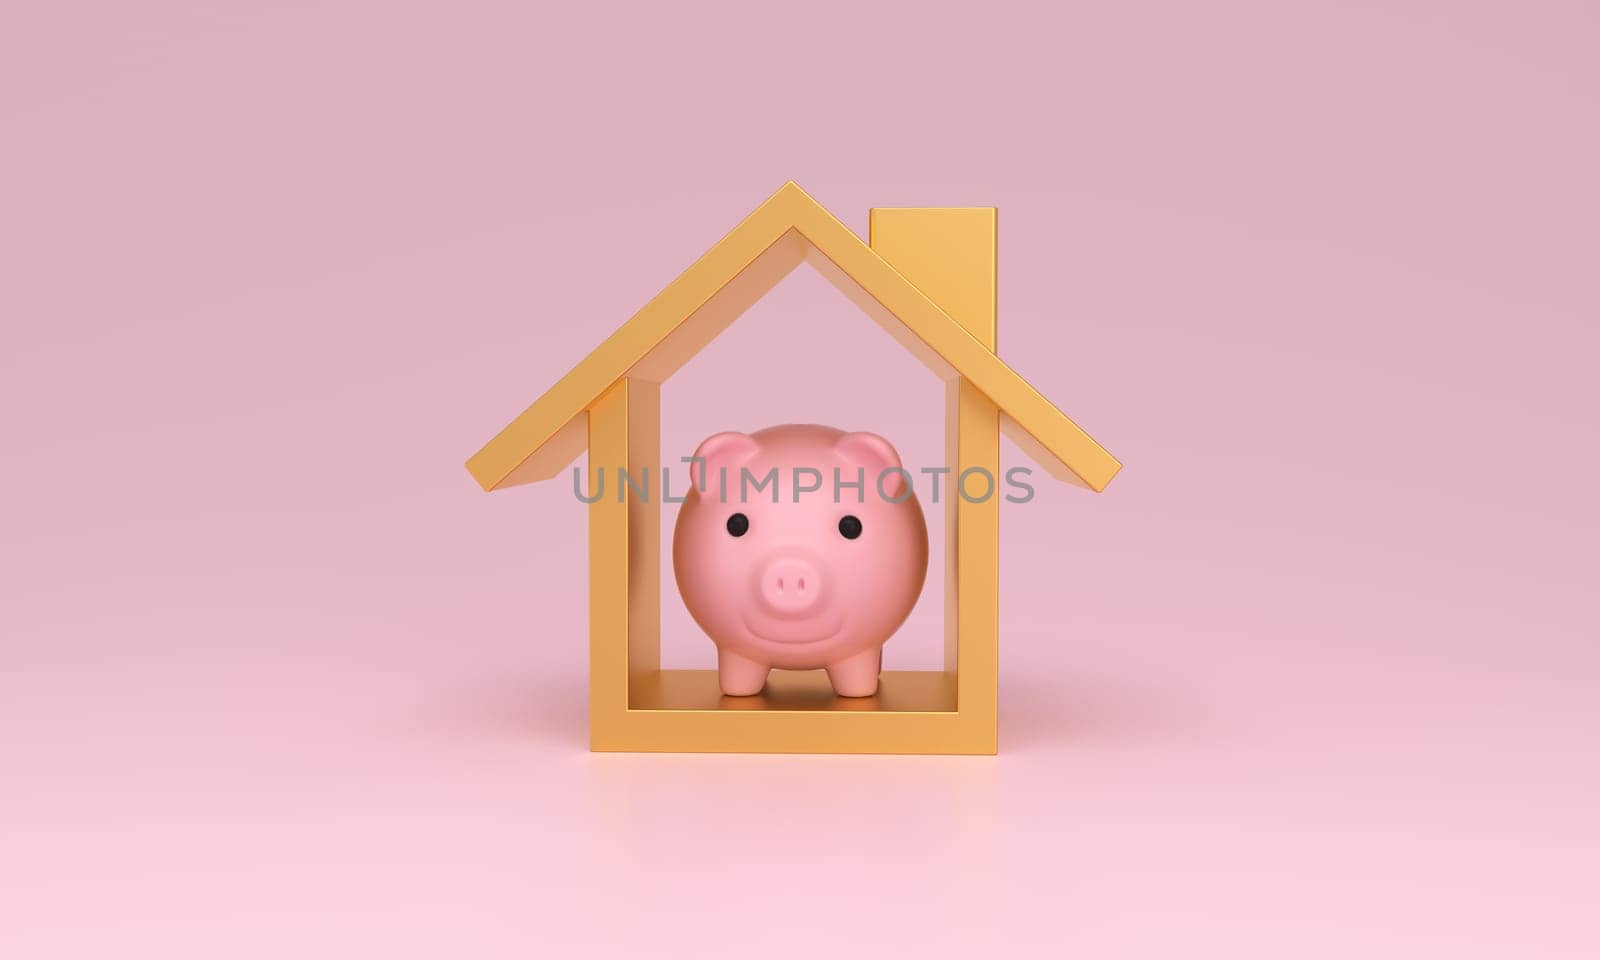 Piggy bank inside icon house on pink background. 3D rendering.